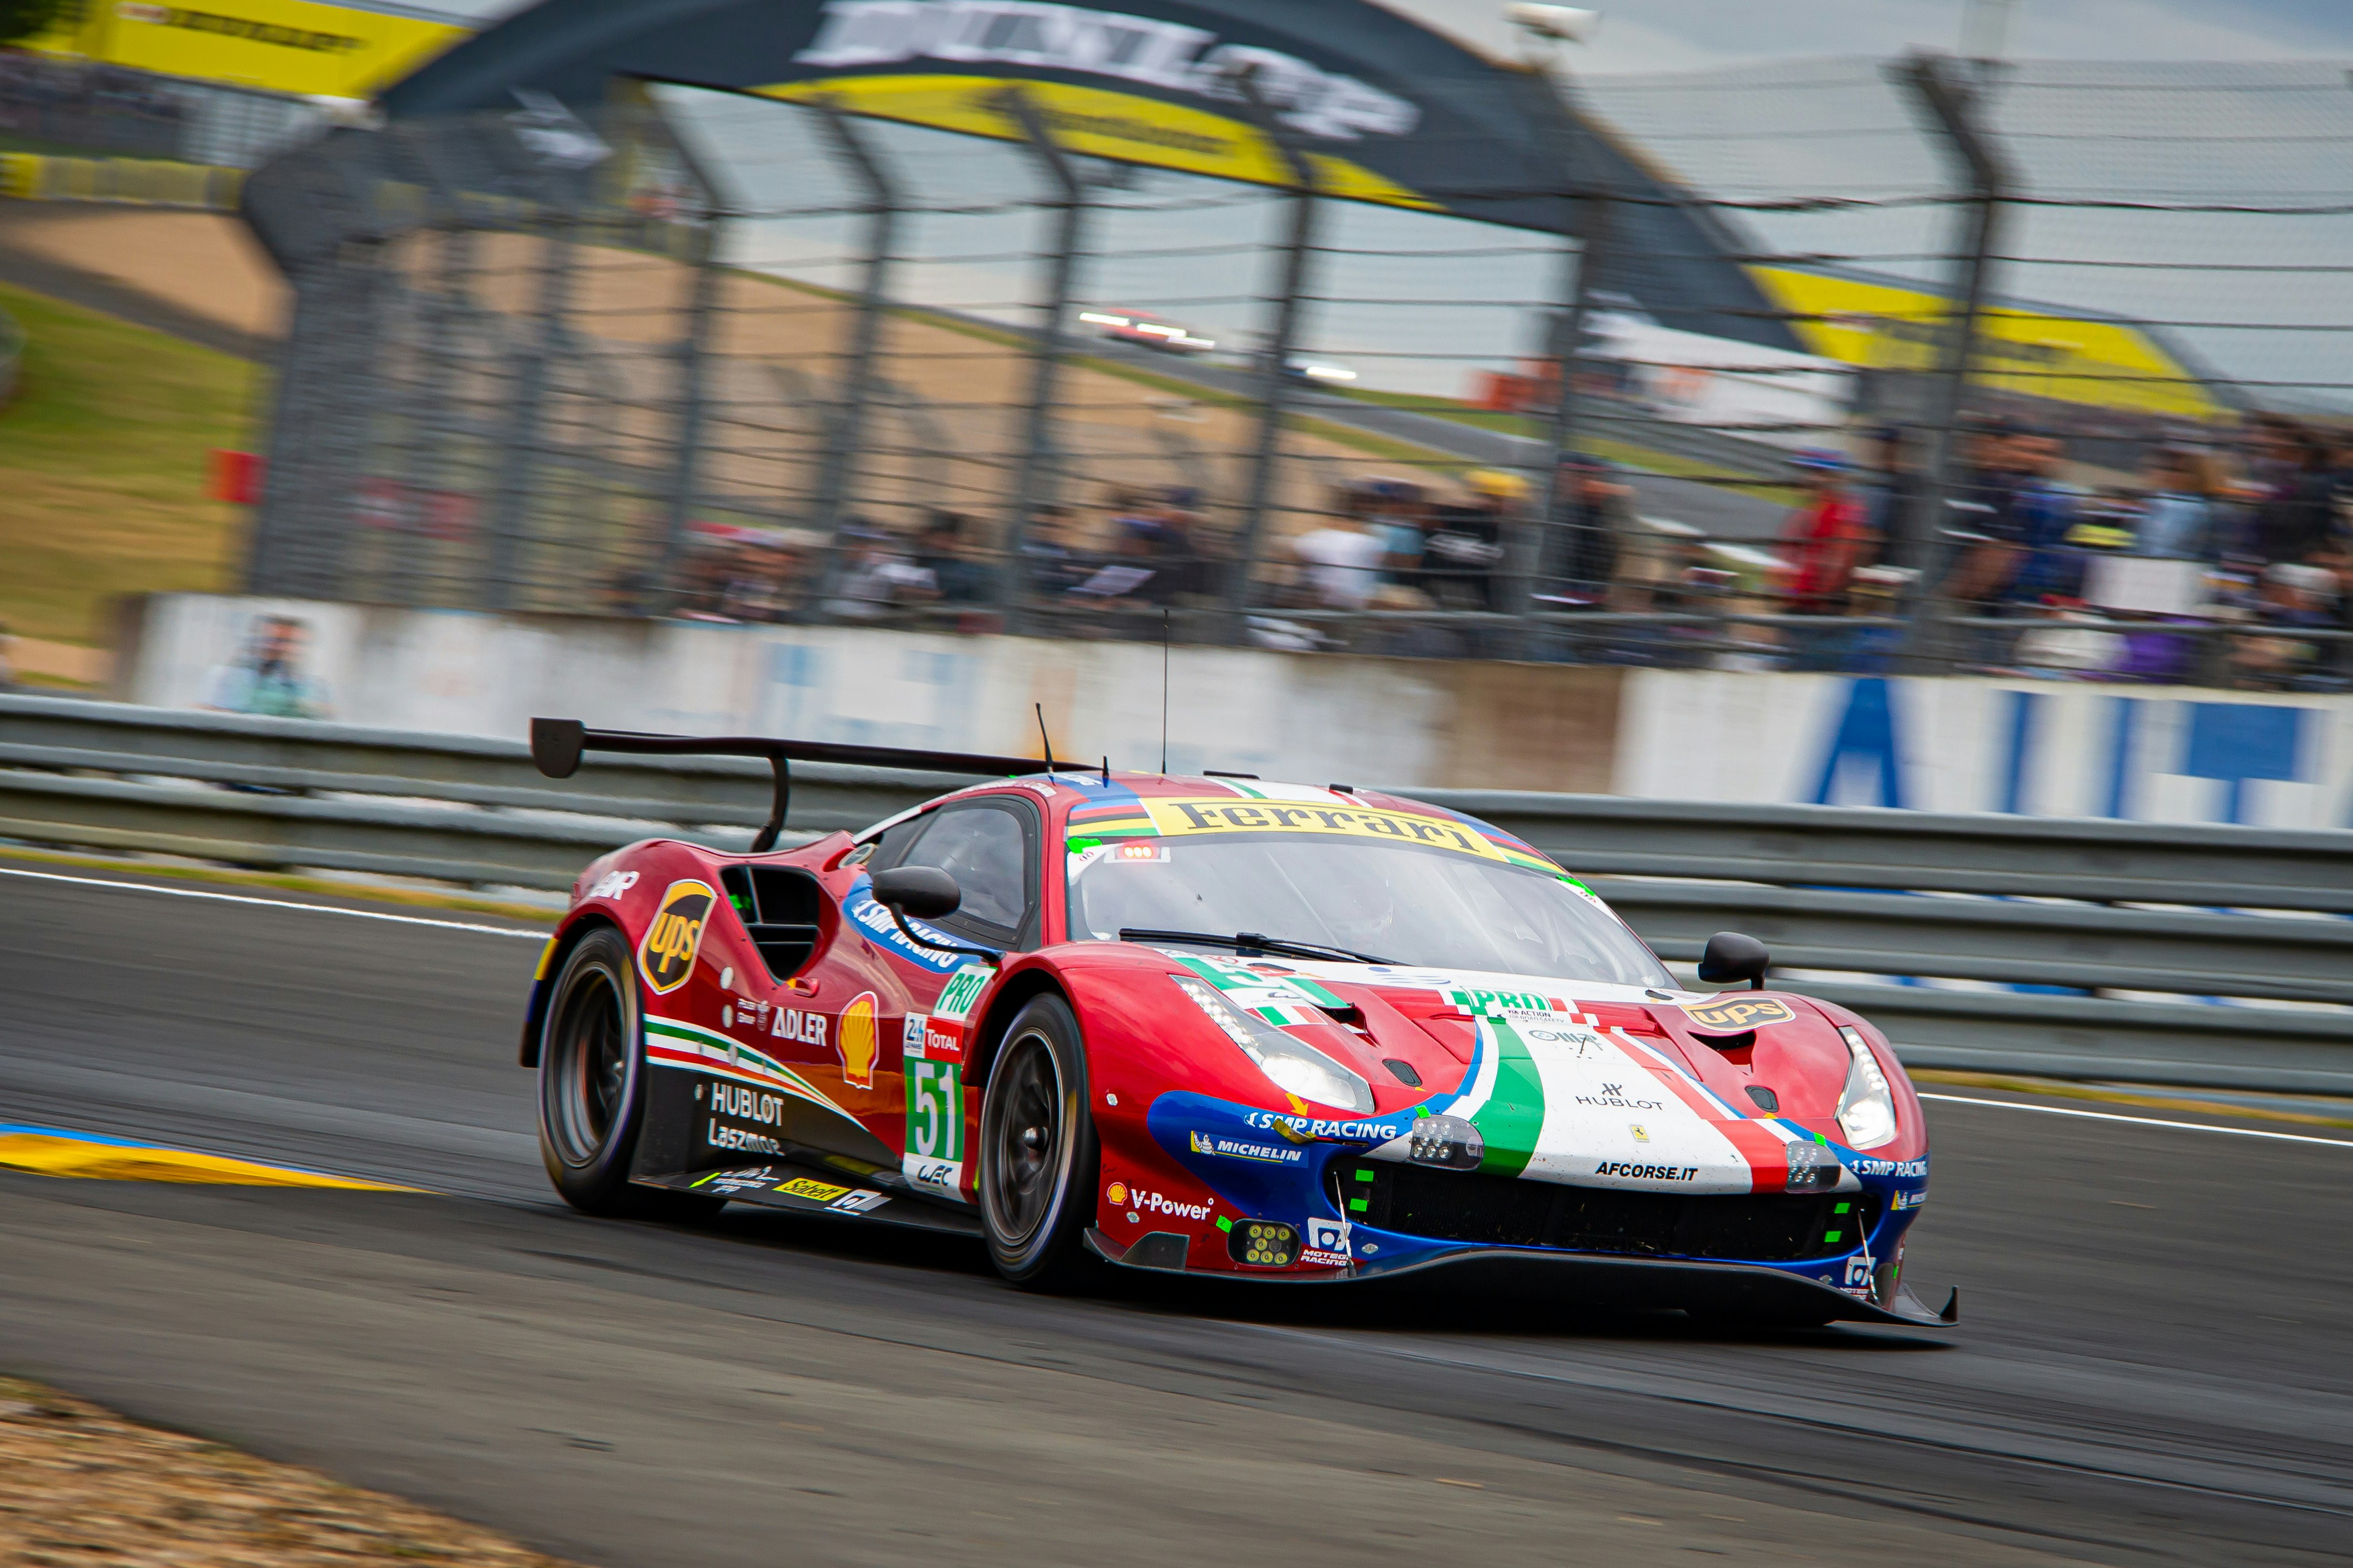 Ferrari 488 GTE #51 of AF Corse - 24 hrs Le Mans class winner. Going passed the Dunlop bridge during the 24 hours of Le Mans 2019. The drivers were Alessandro Pier Guidi, James Calado and Daniel Serra